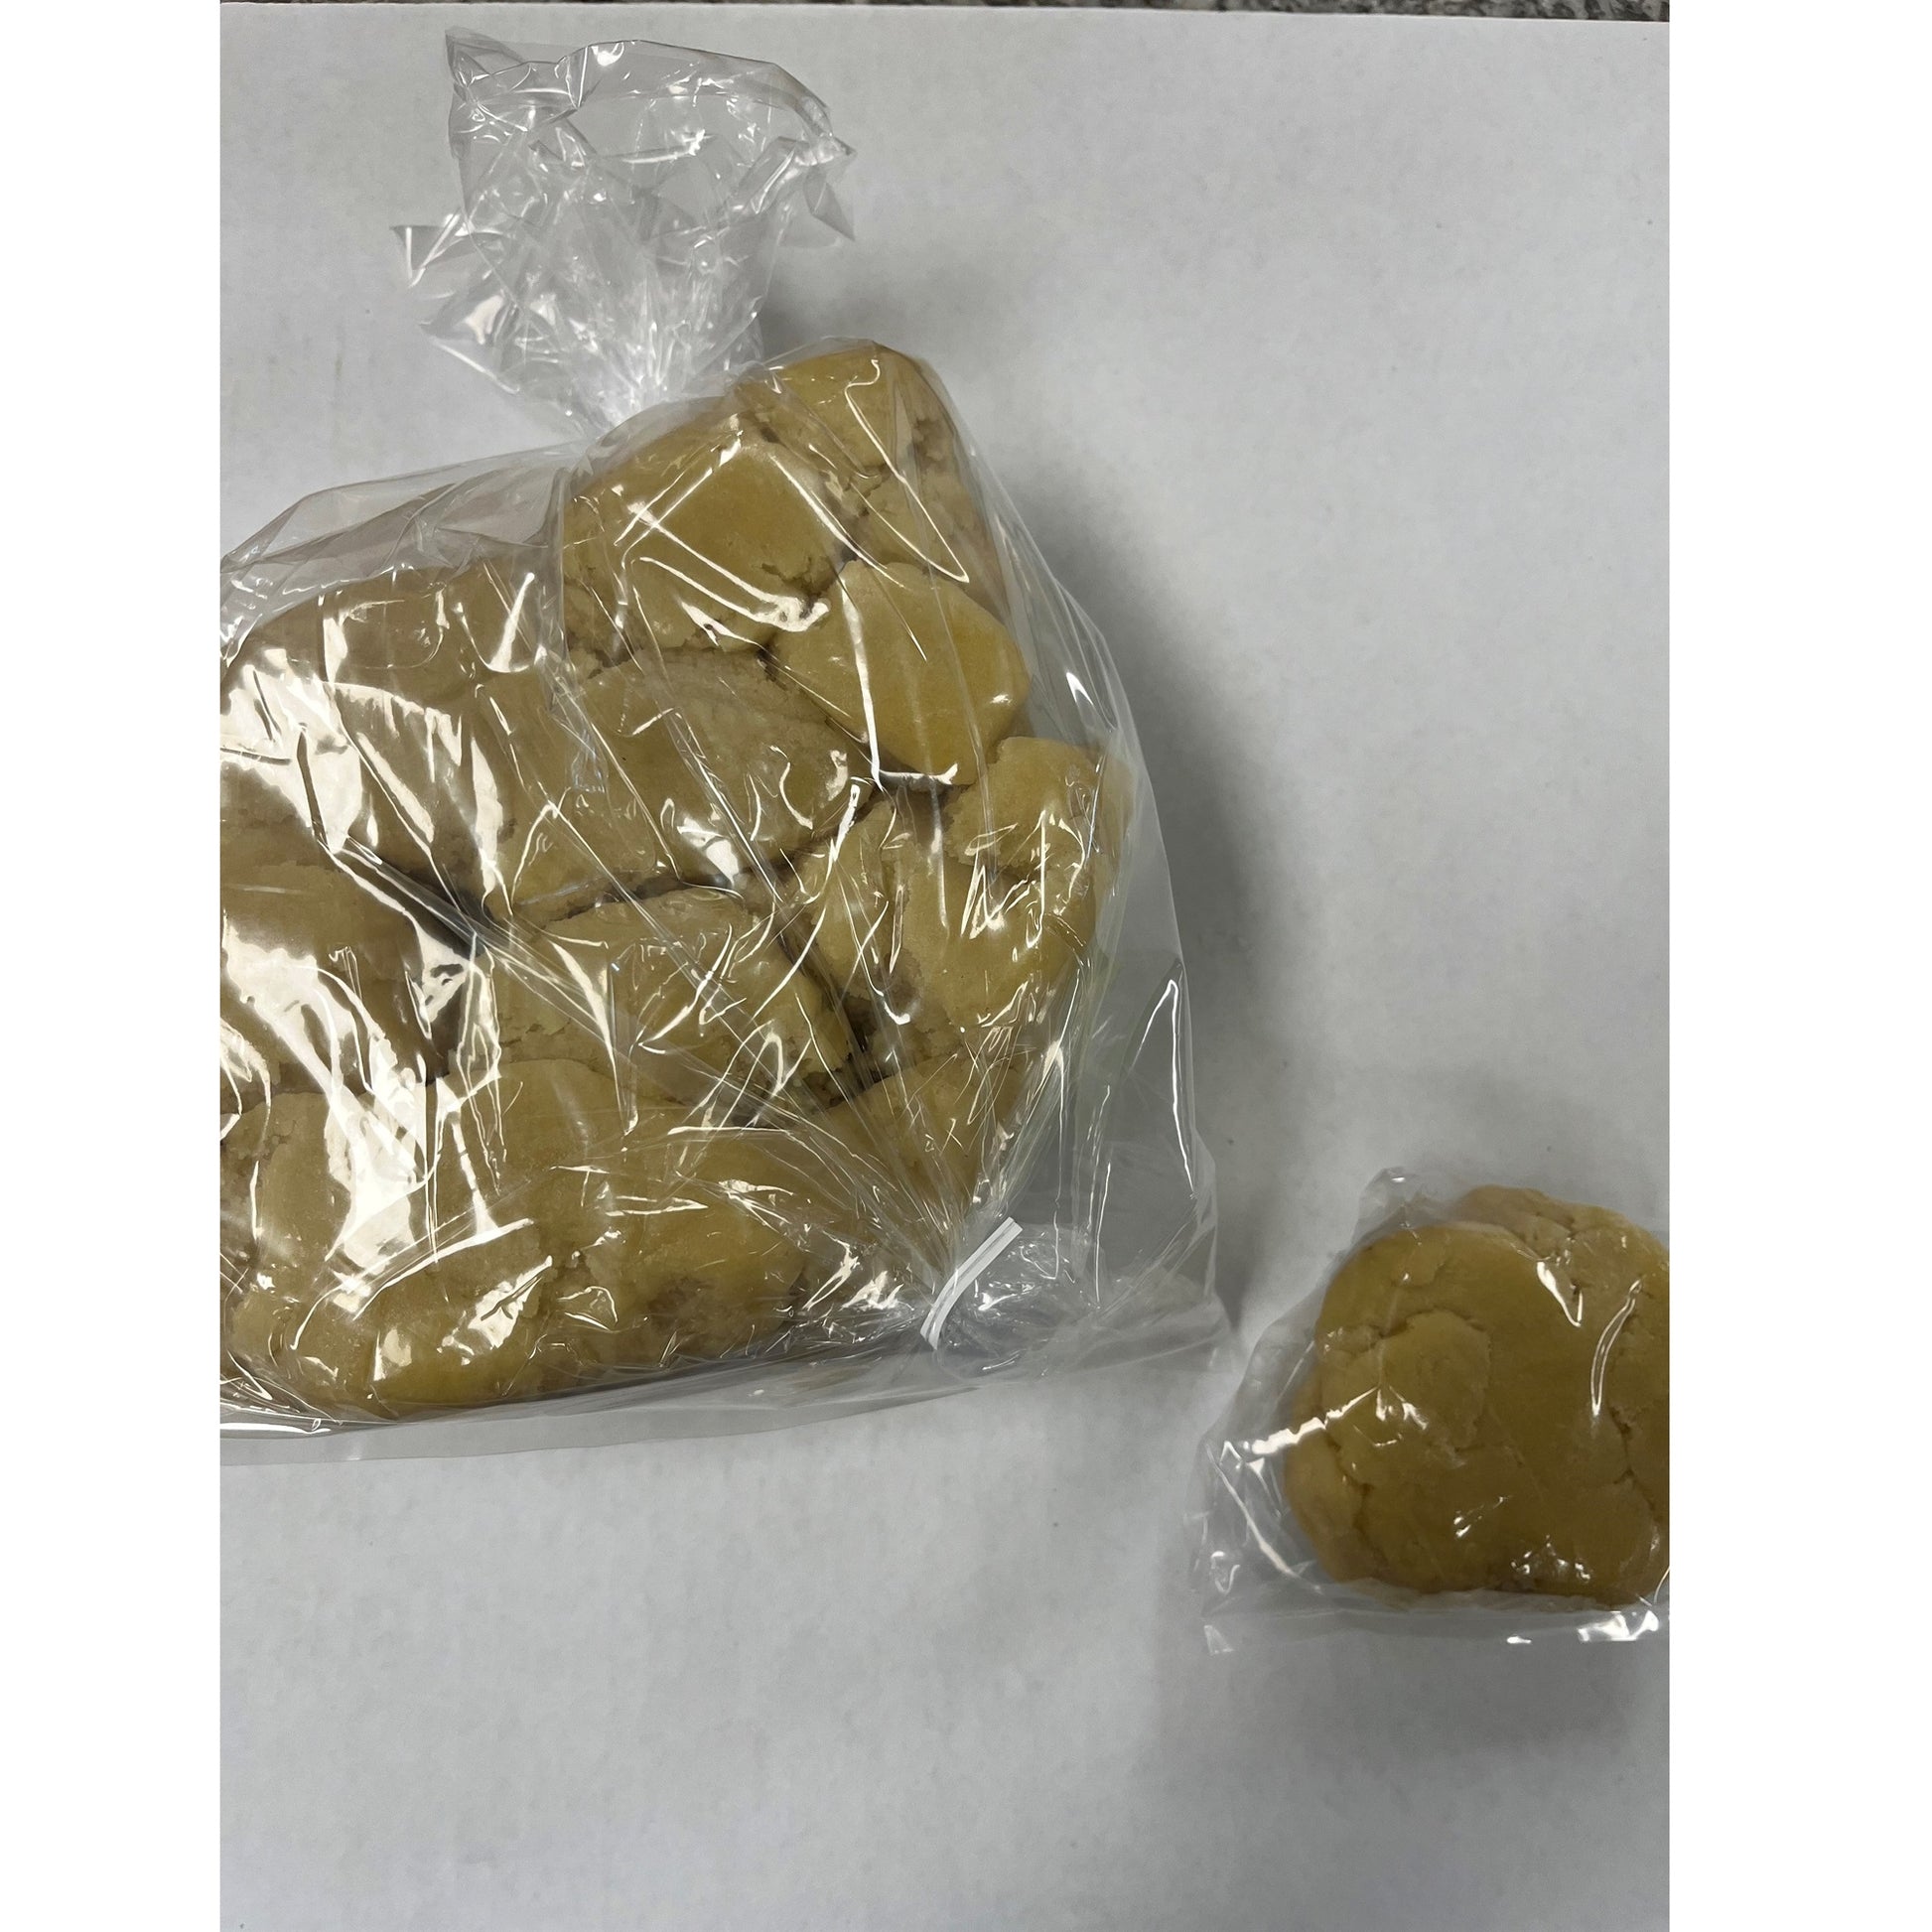 The image depicts a clear plastic bag containing a large quantity of almond paste, with a smaller portion of the paste packaged separately outside the main bag. The almond paste has a smooth, uniform texture and a pale golden color, characteristic of this confectionery ingredient often used in baking and pastry making.